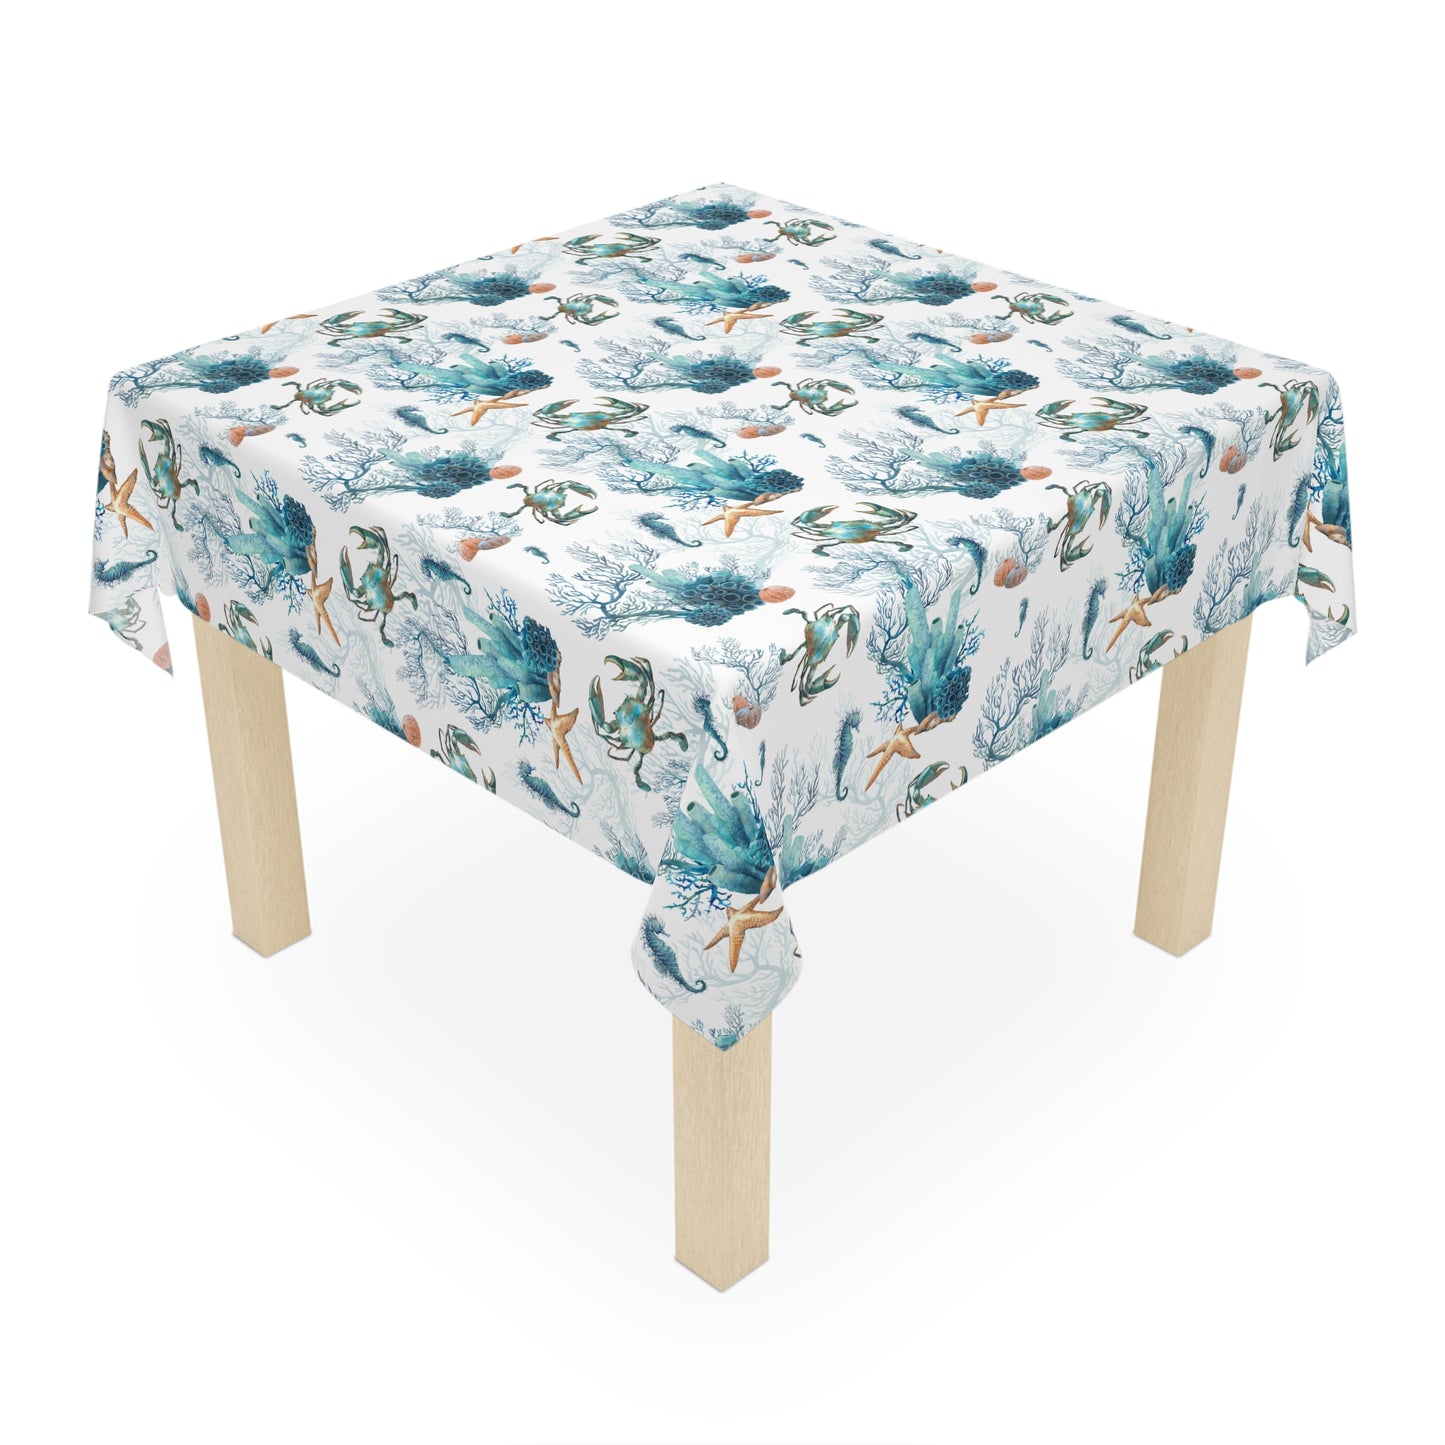 Watercolor Coral Reef Tablecloth